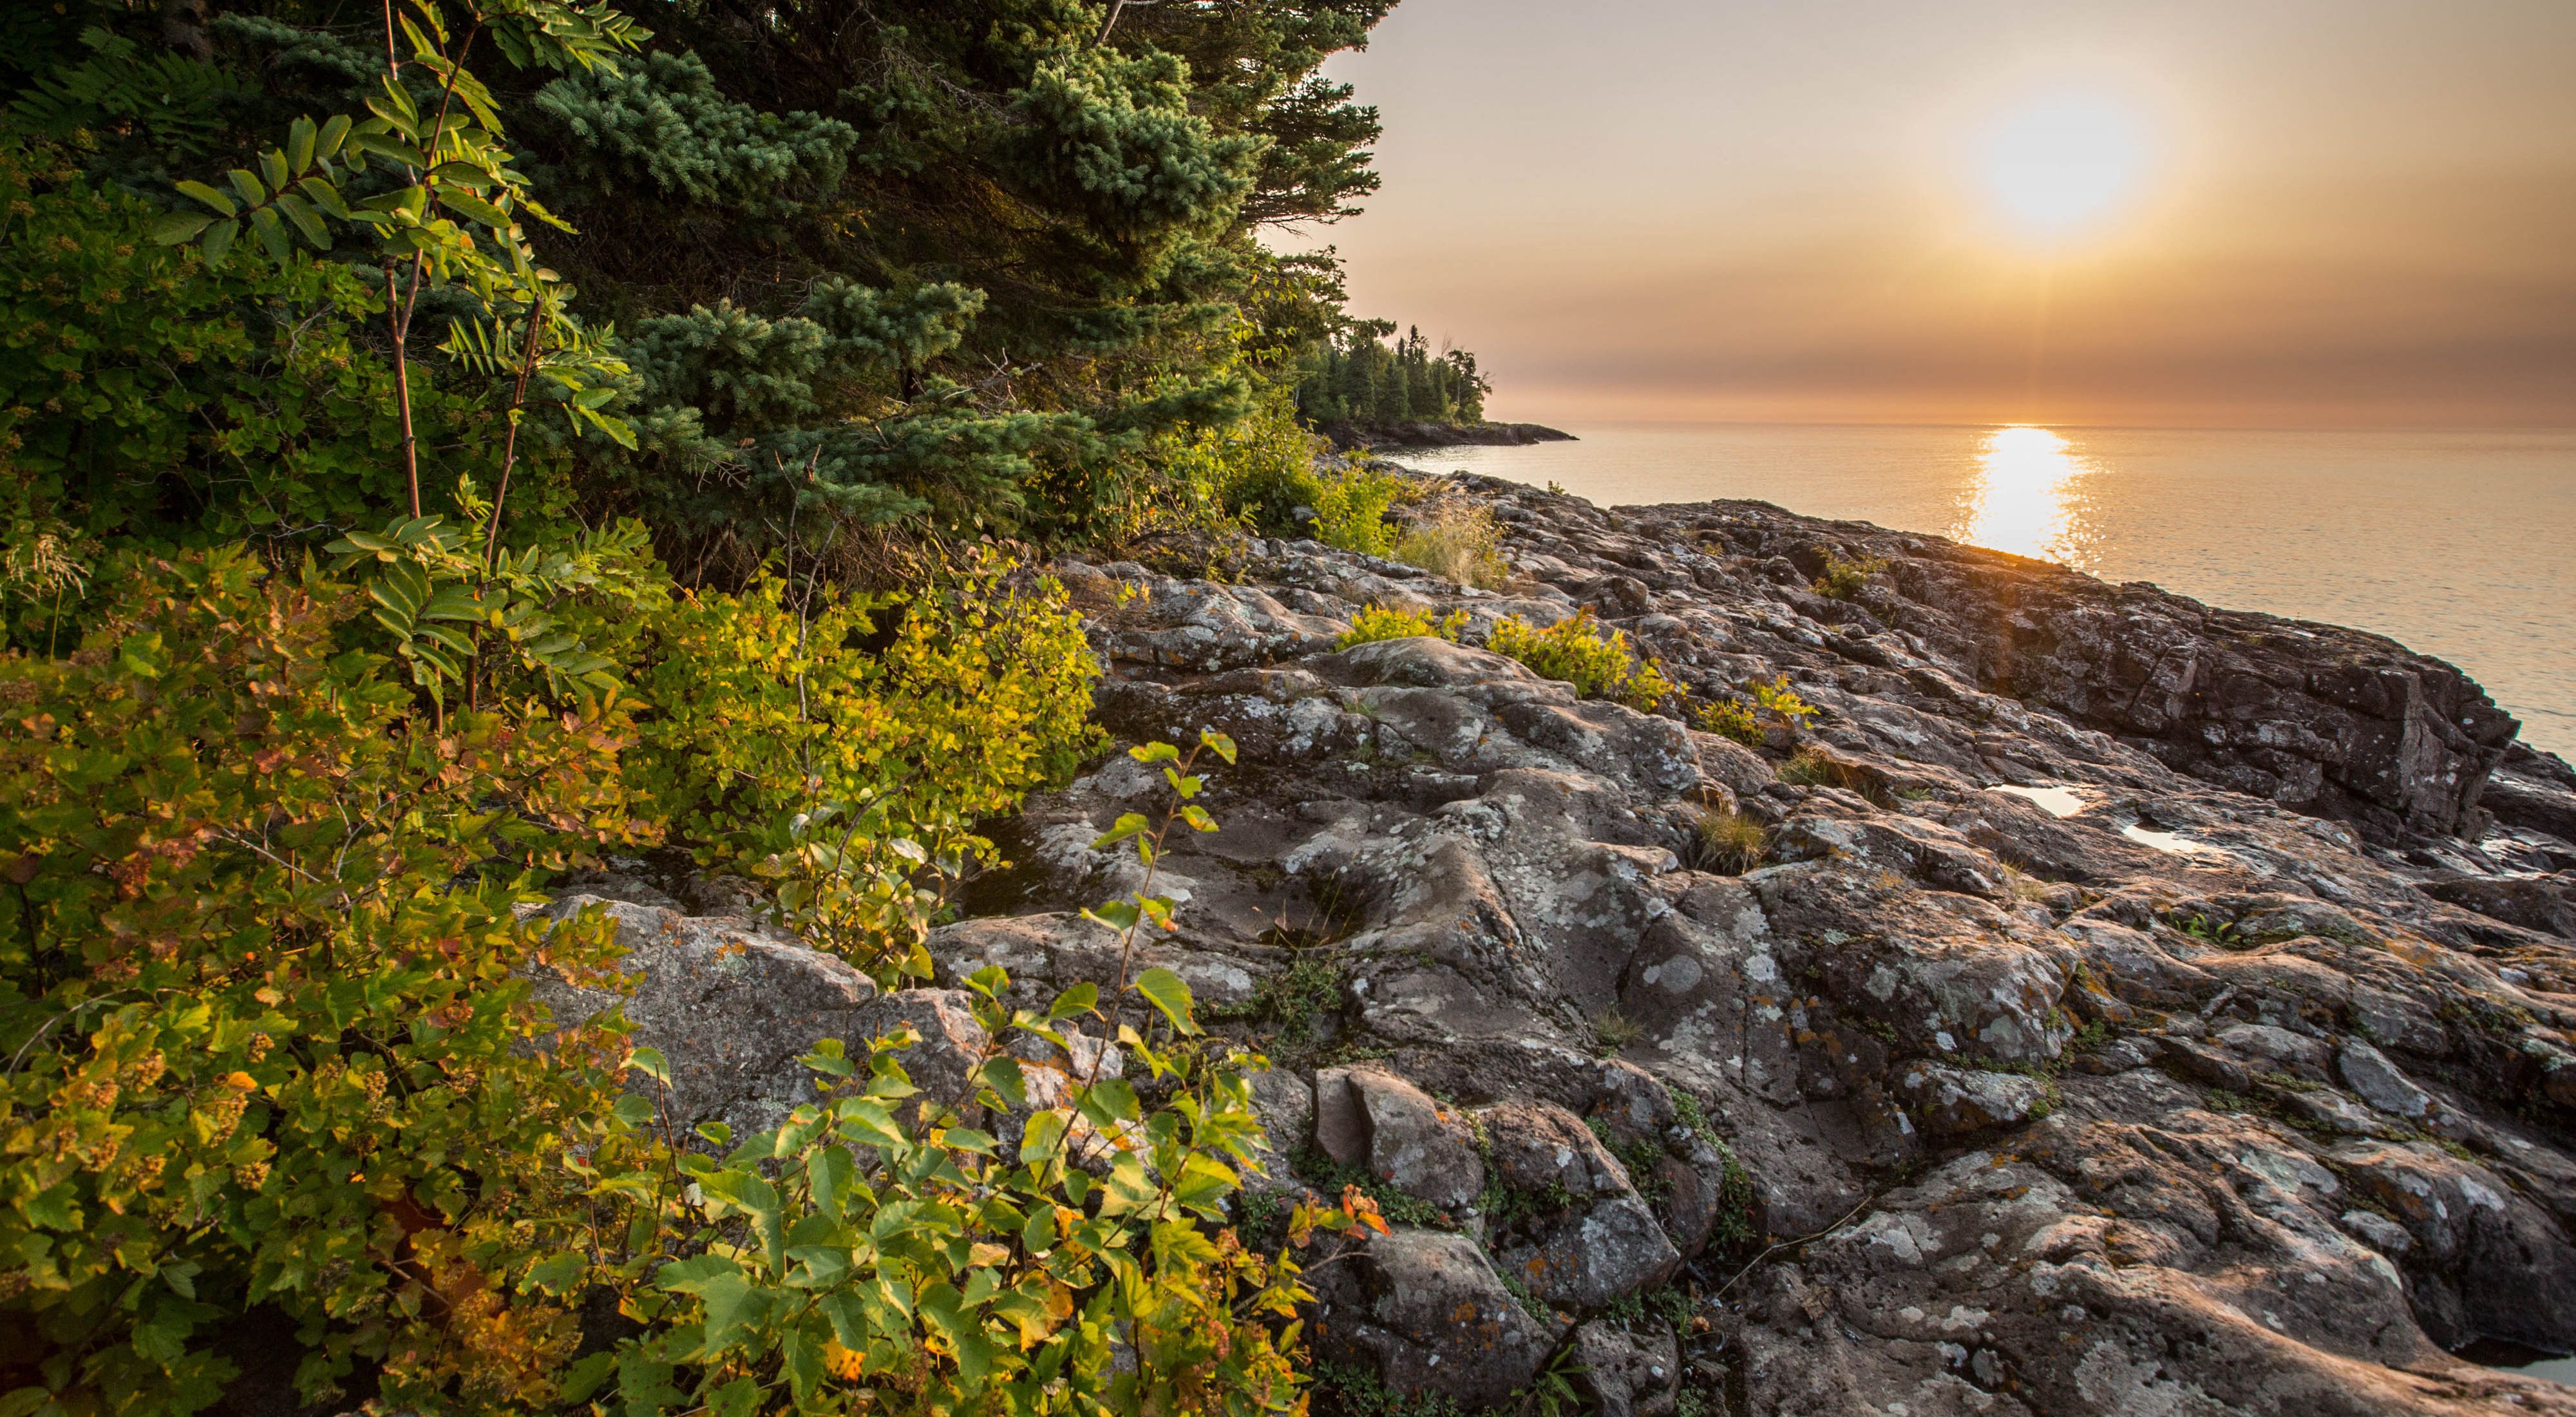 A rocky shoreline leads to the calm waters of the Boundary Waters as the sun sets in the distance.